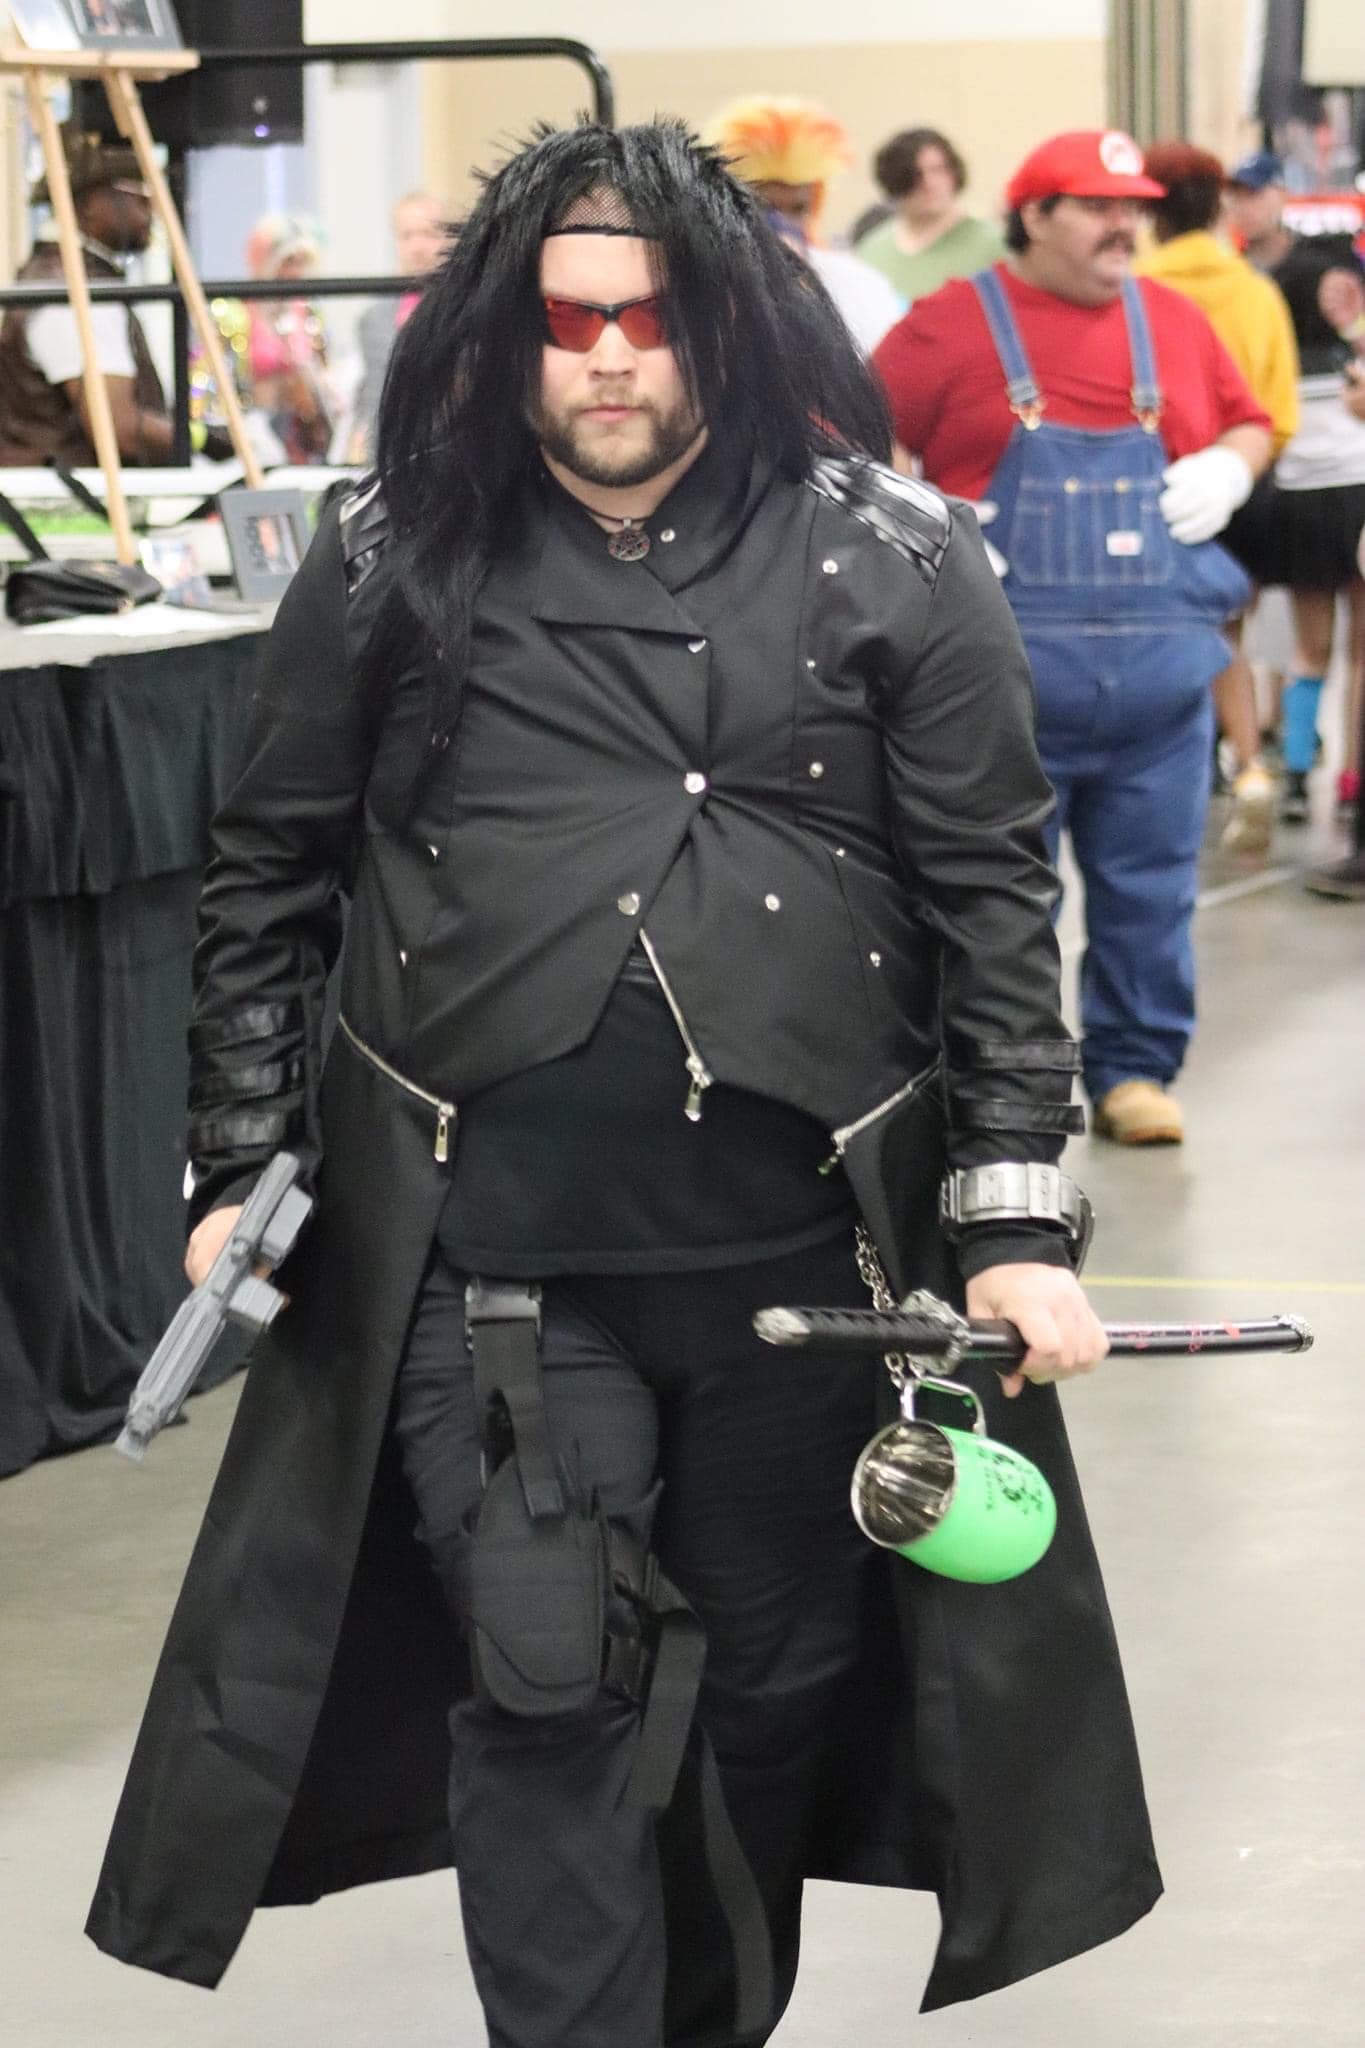 [Cosplay Photos] Fayetteville Comic Con PopCultHQ